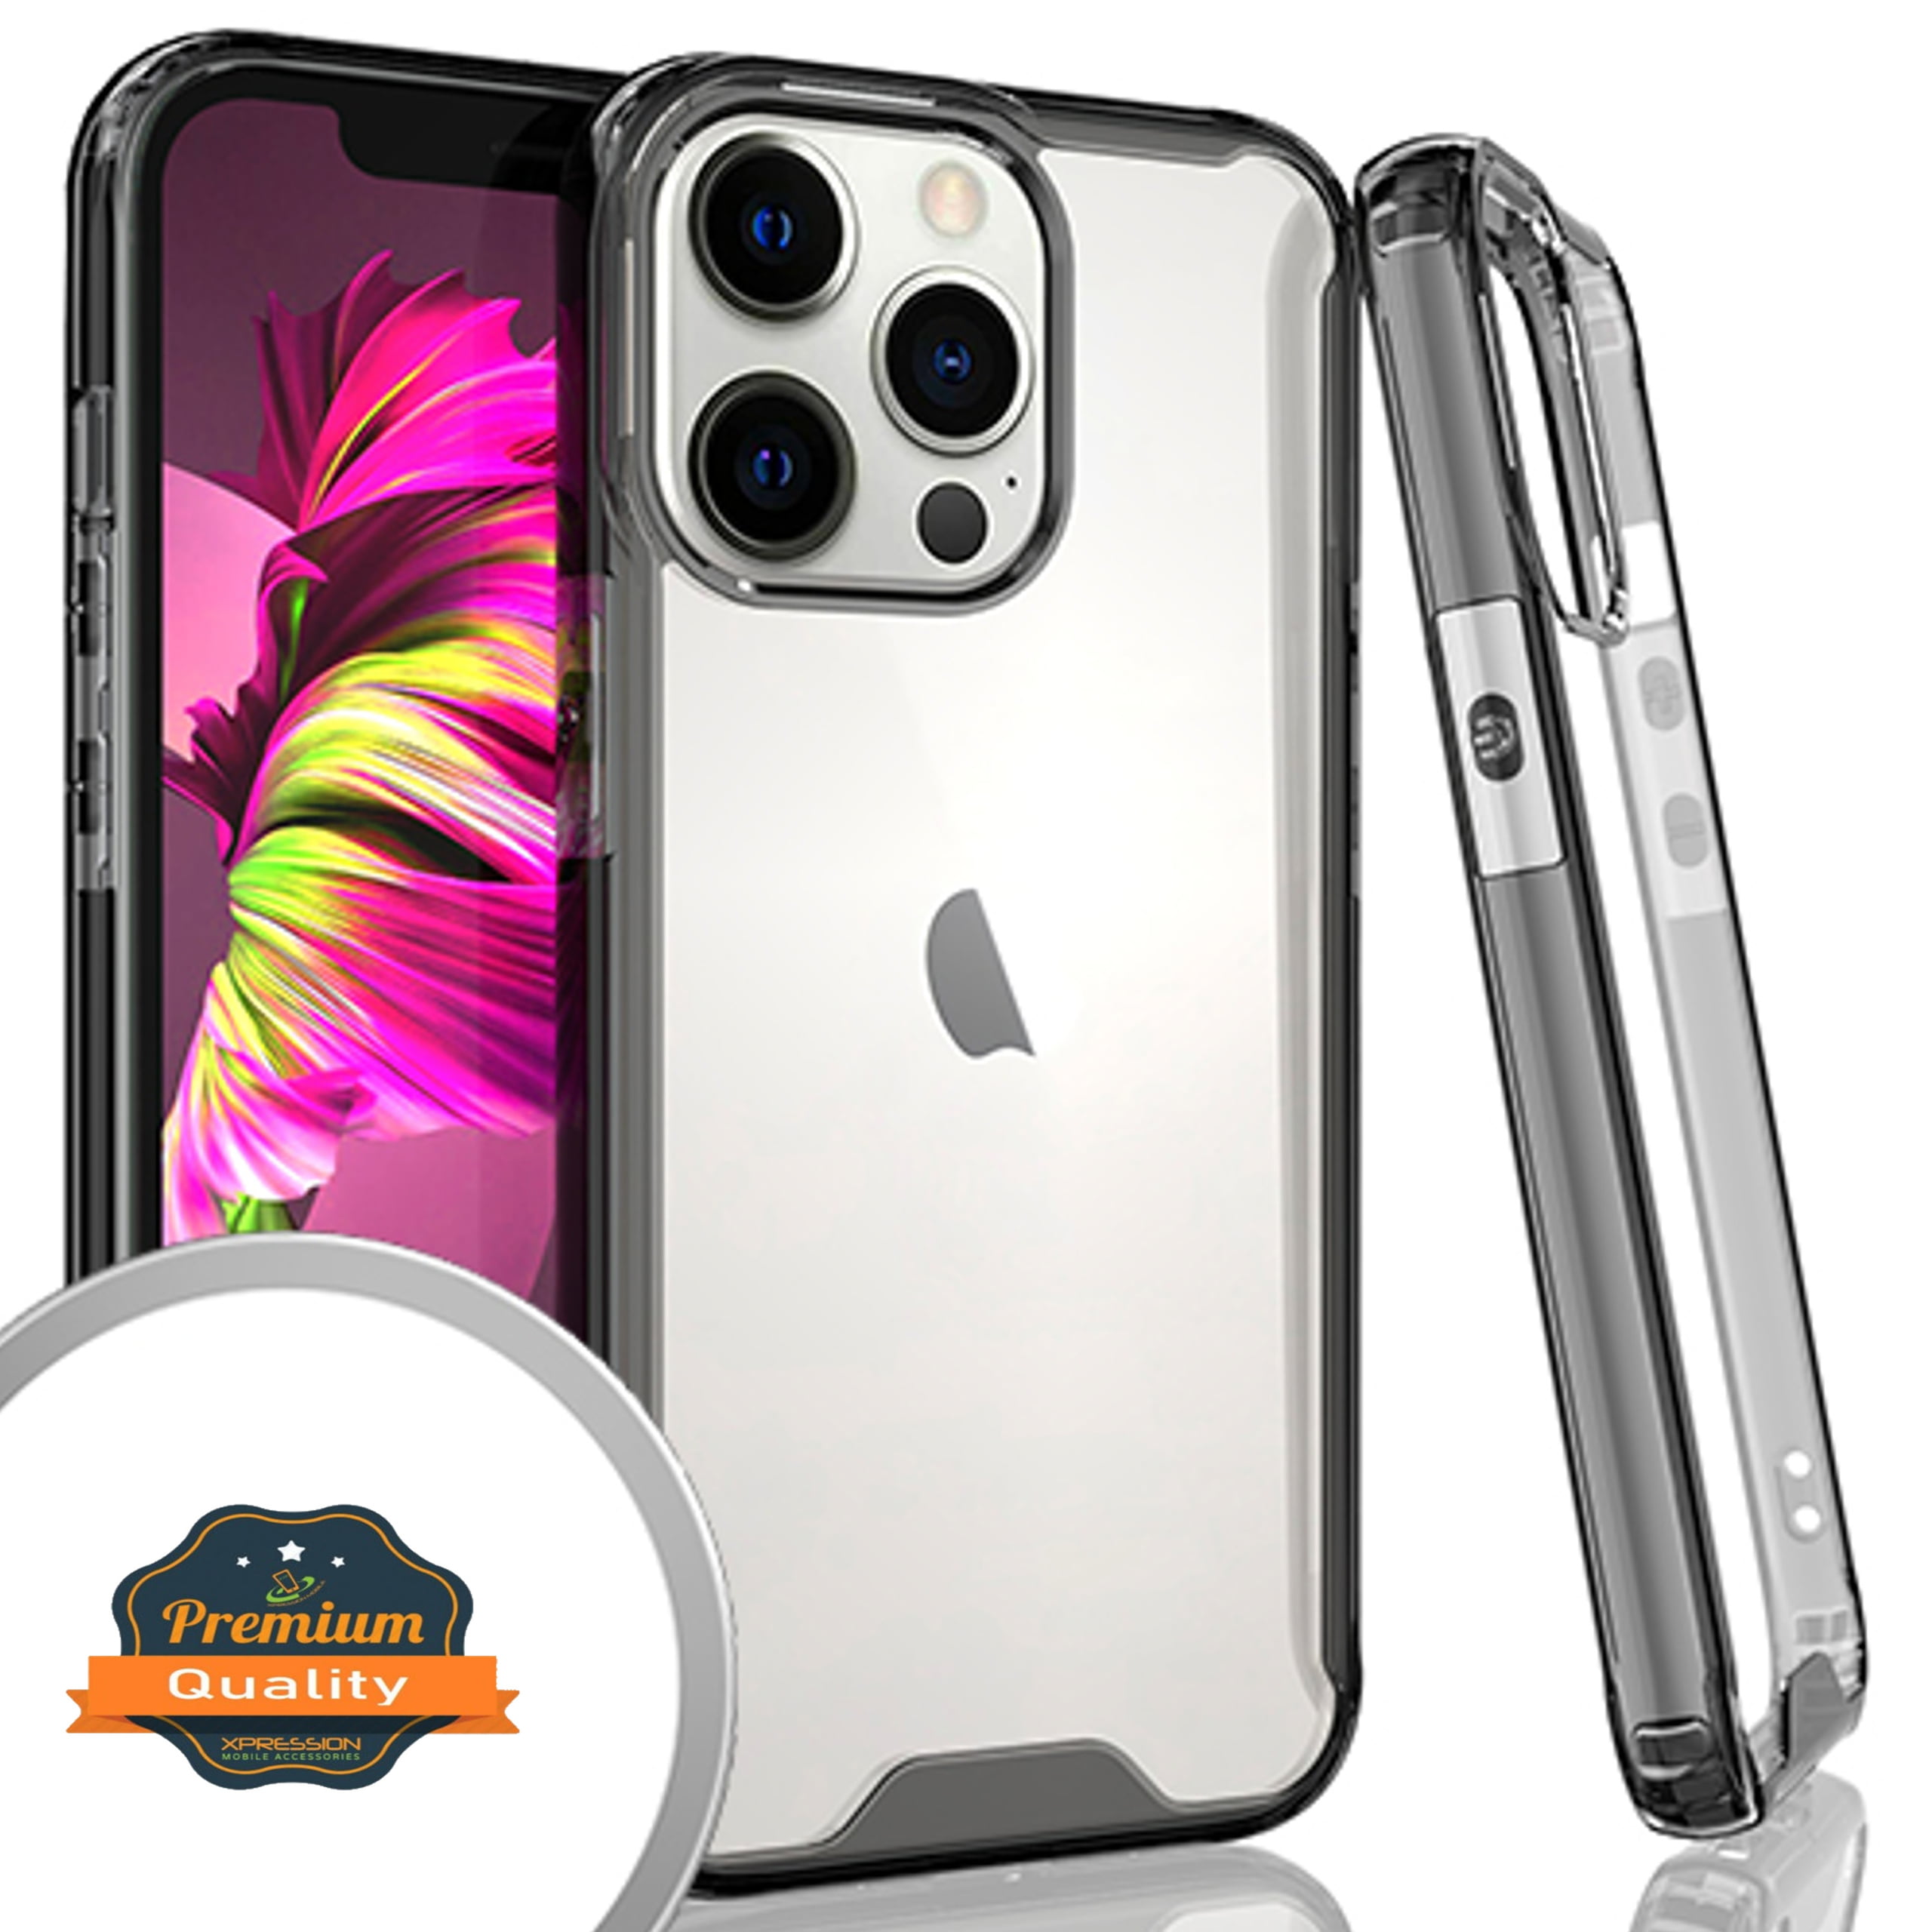  iPhone 11 Case, Shockproof Ultra Slim Fit Silicone White Cover  TPU Soft Gel Rubber Cover Shock Resistance Protective Back Bumper for Apple iPhone  11 White : Cell Phones & Accessories